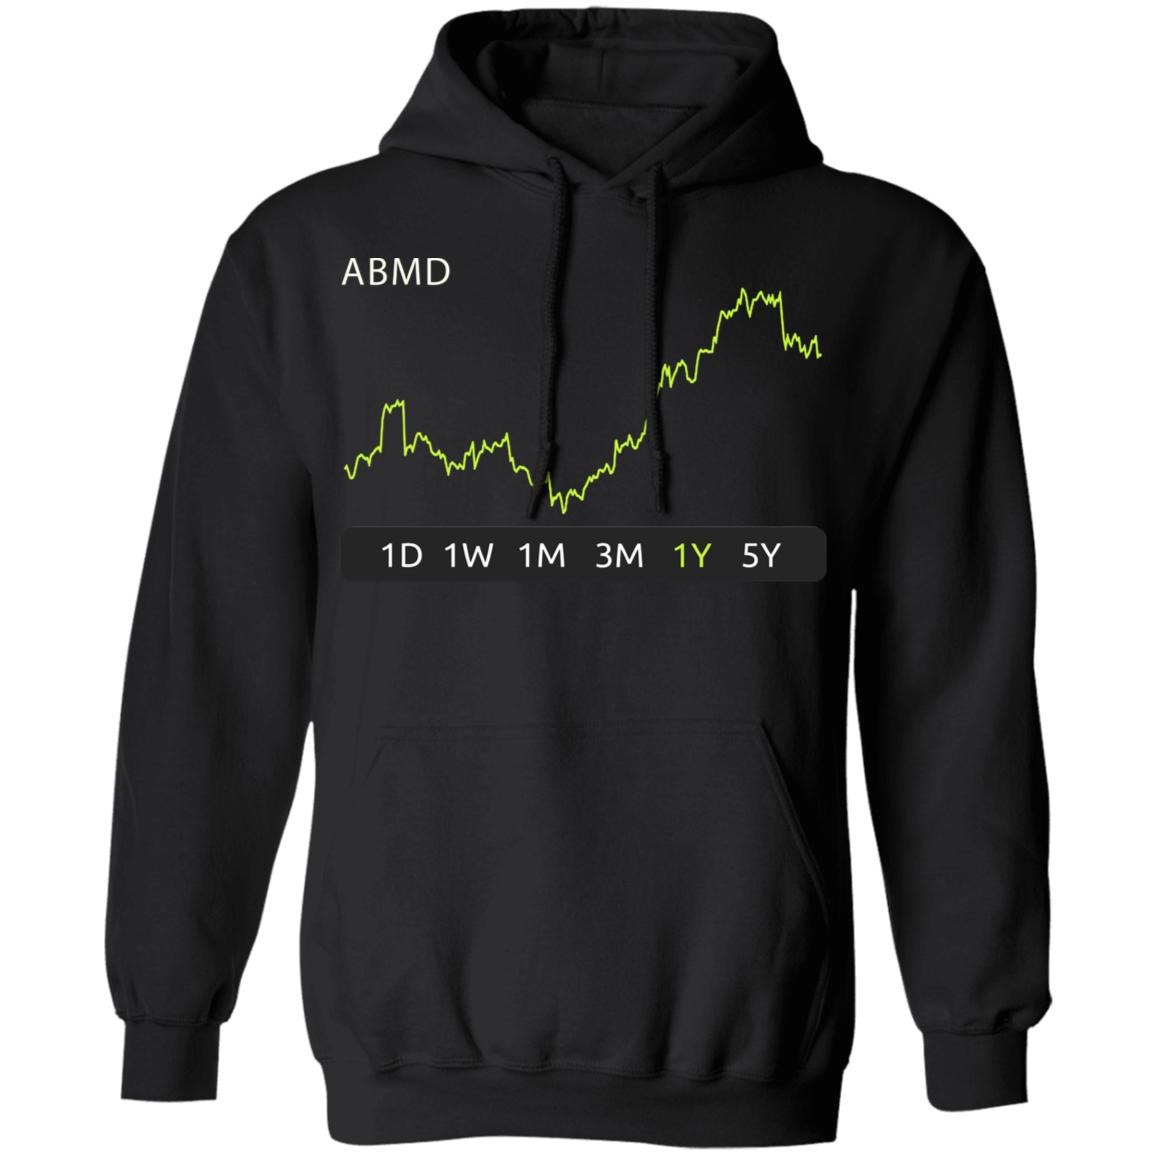 ABMD Stock 1y Pullover Hoodie